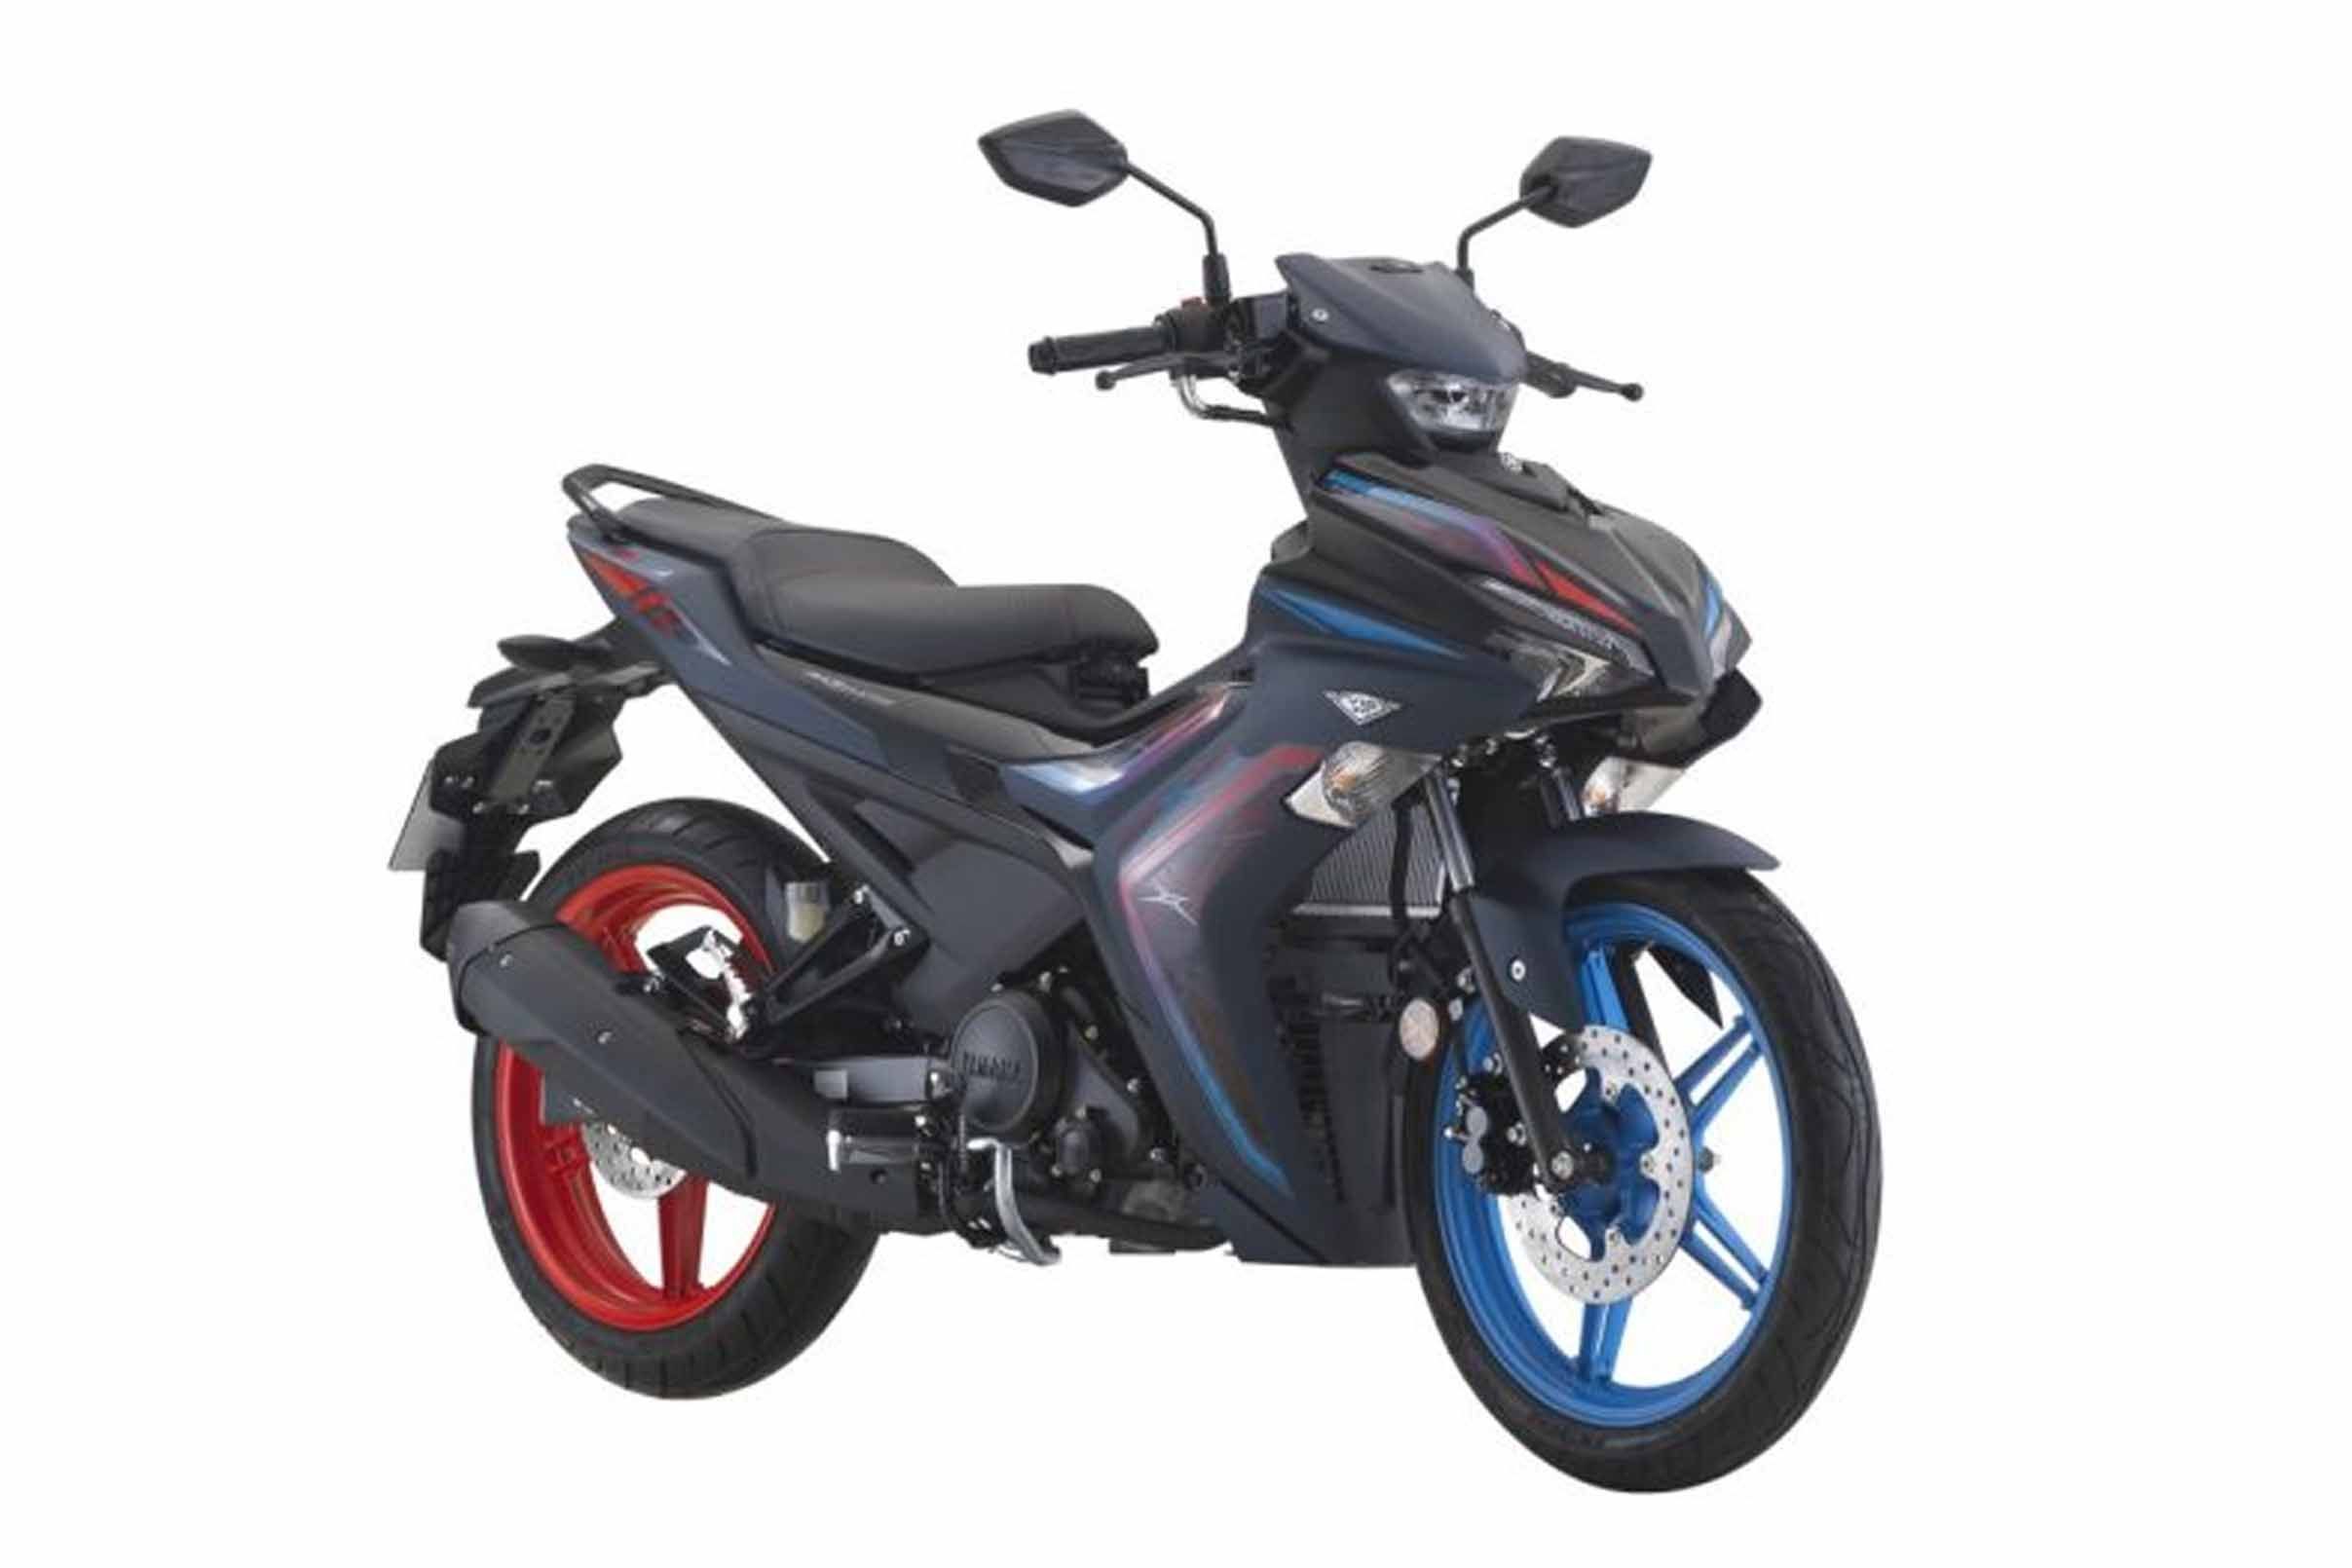 2021 Y16ZR Doxou Edition is now part of Yamaha Malaysia lineup